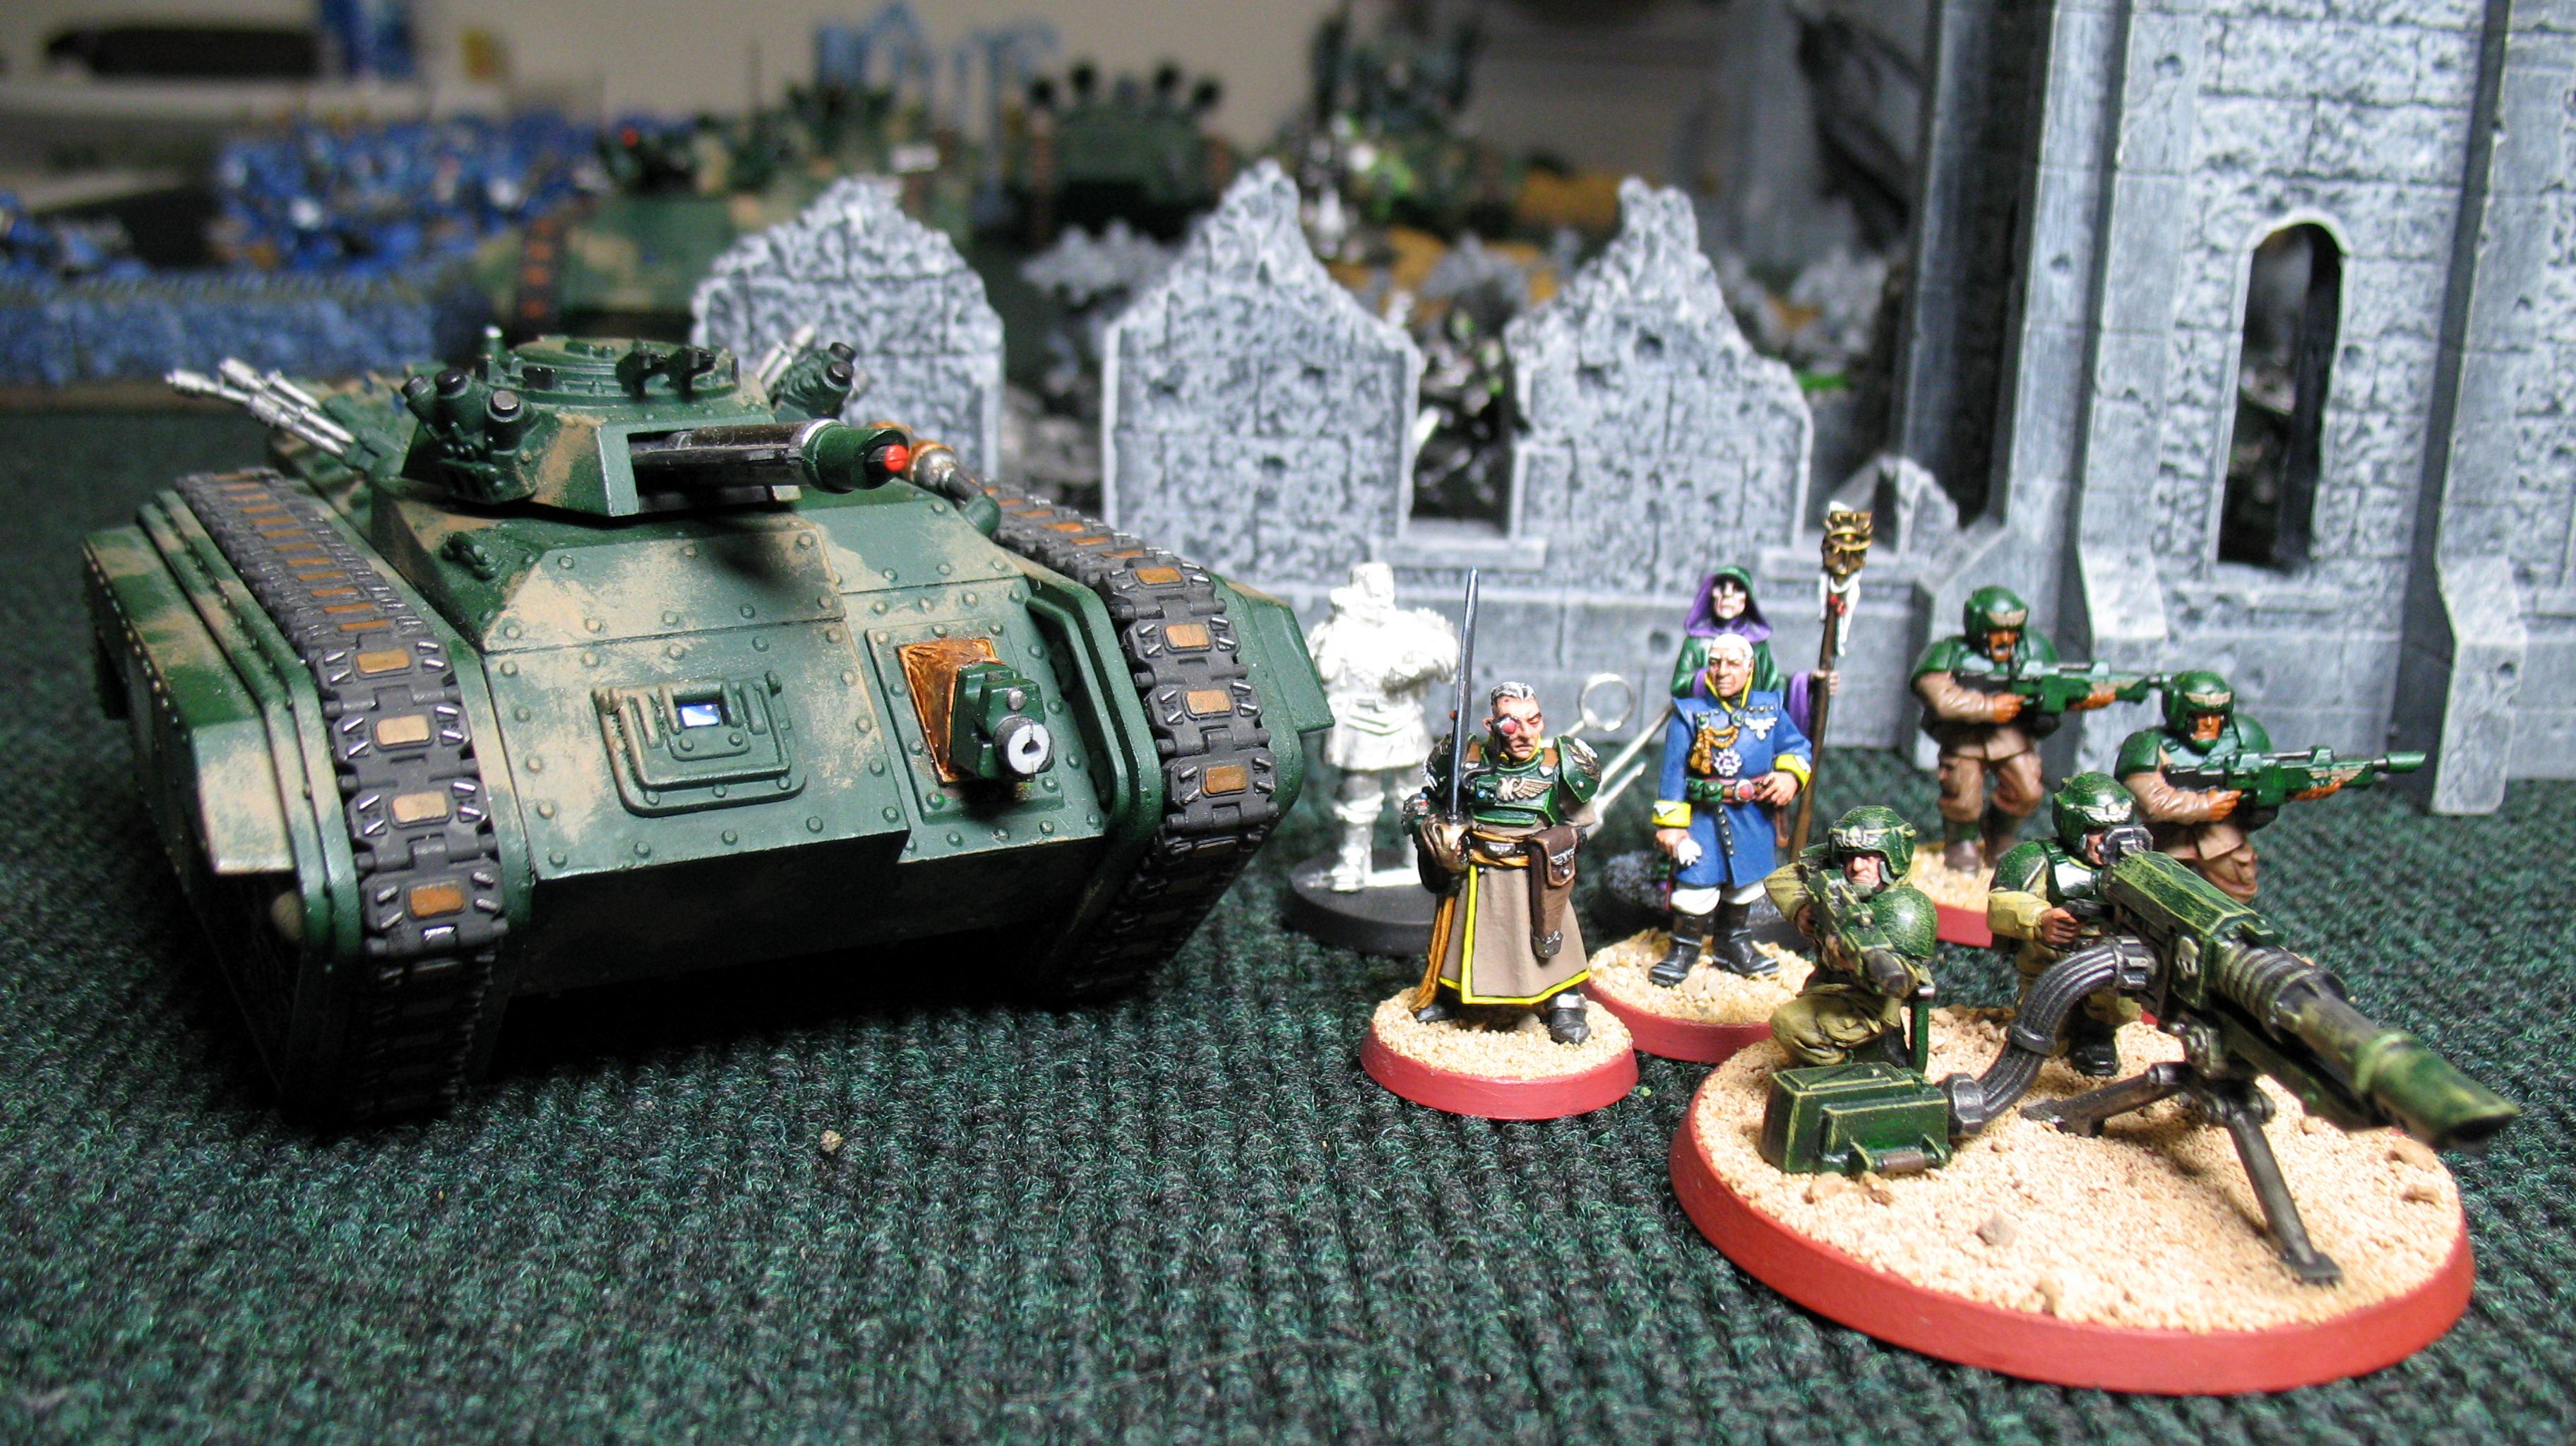 Astropath, Cadians, Company Command Squad, Games Workshop, Imperial Guard, Lascannon, Master Of Ordnance, Officer Of The Fleet, Regimental Advisors, Warhammer 40,000